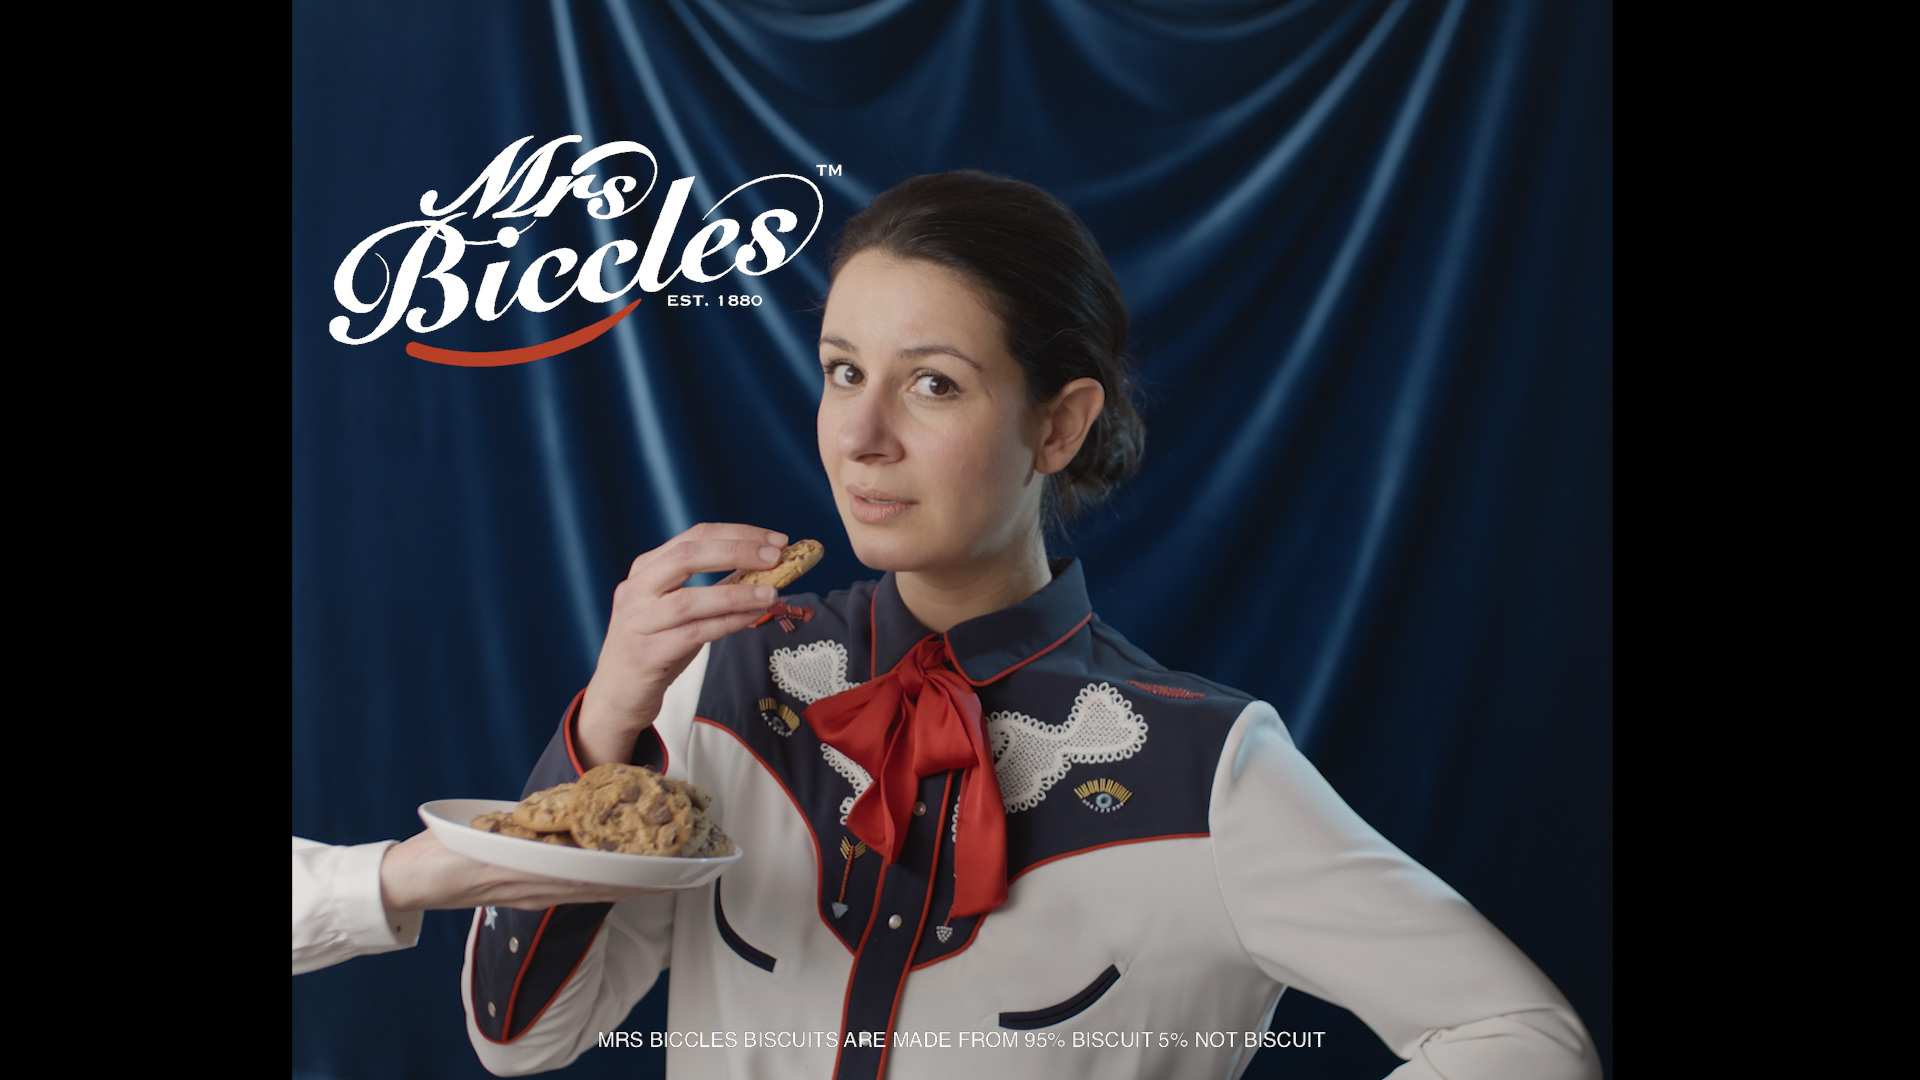 Mrs Biccles Biscuits